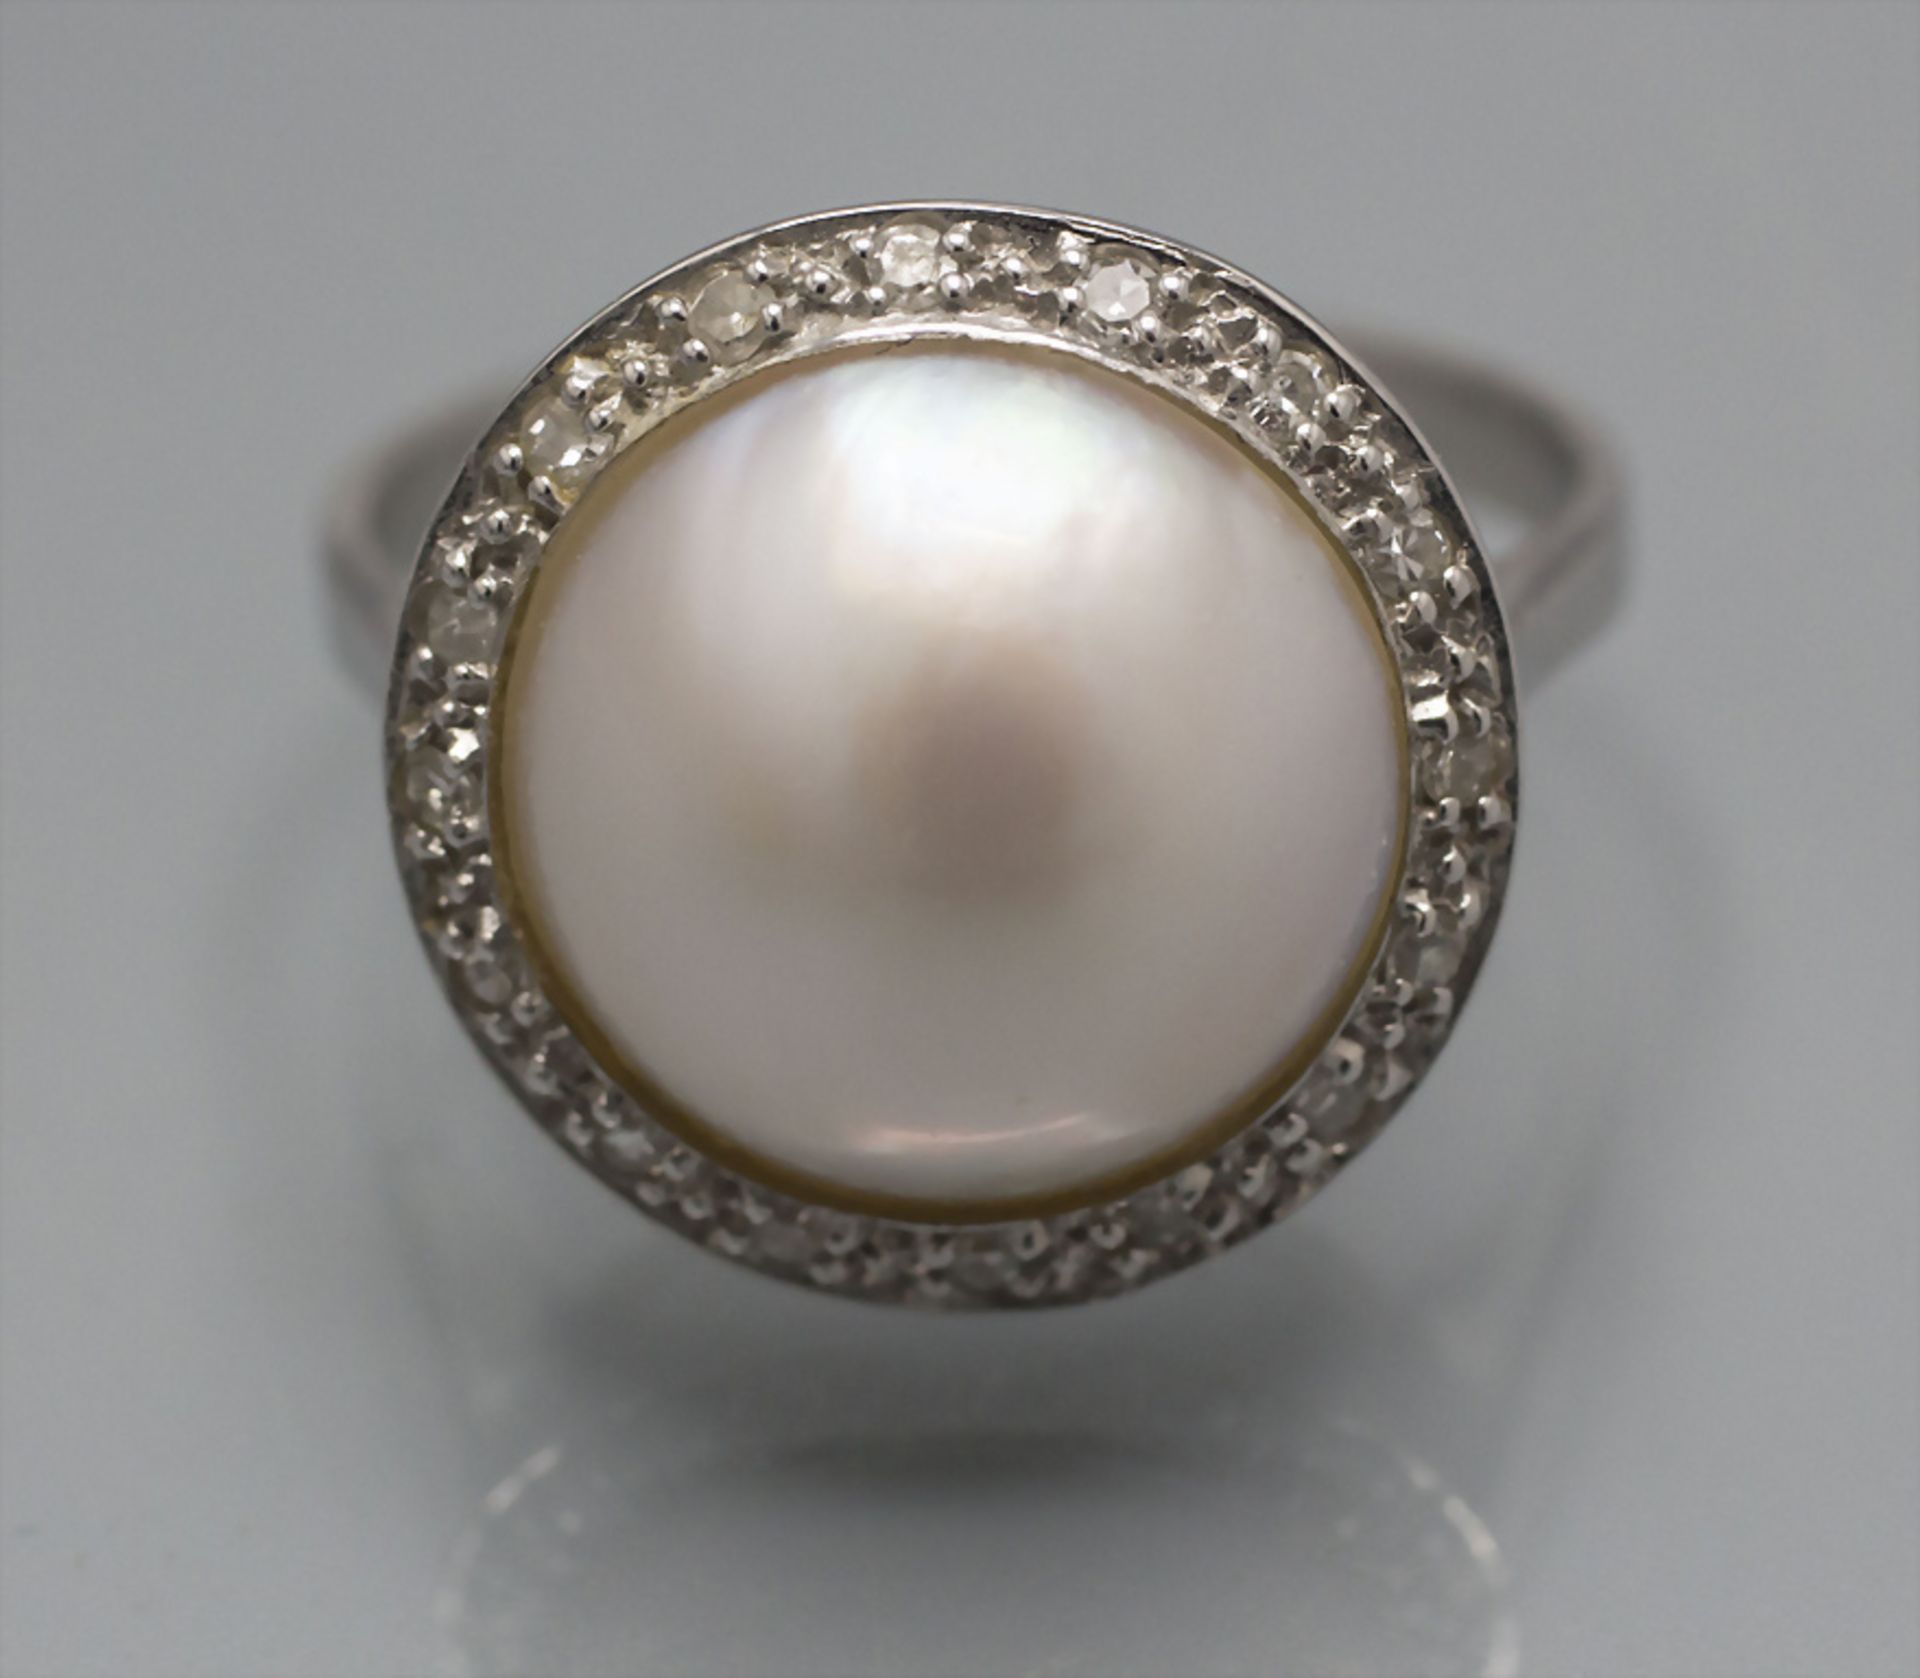 Damenring mit Perle / A ladies 14 ct ring with a pearl